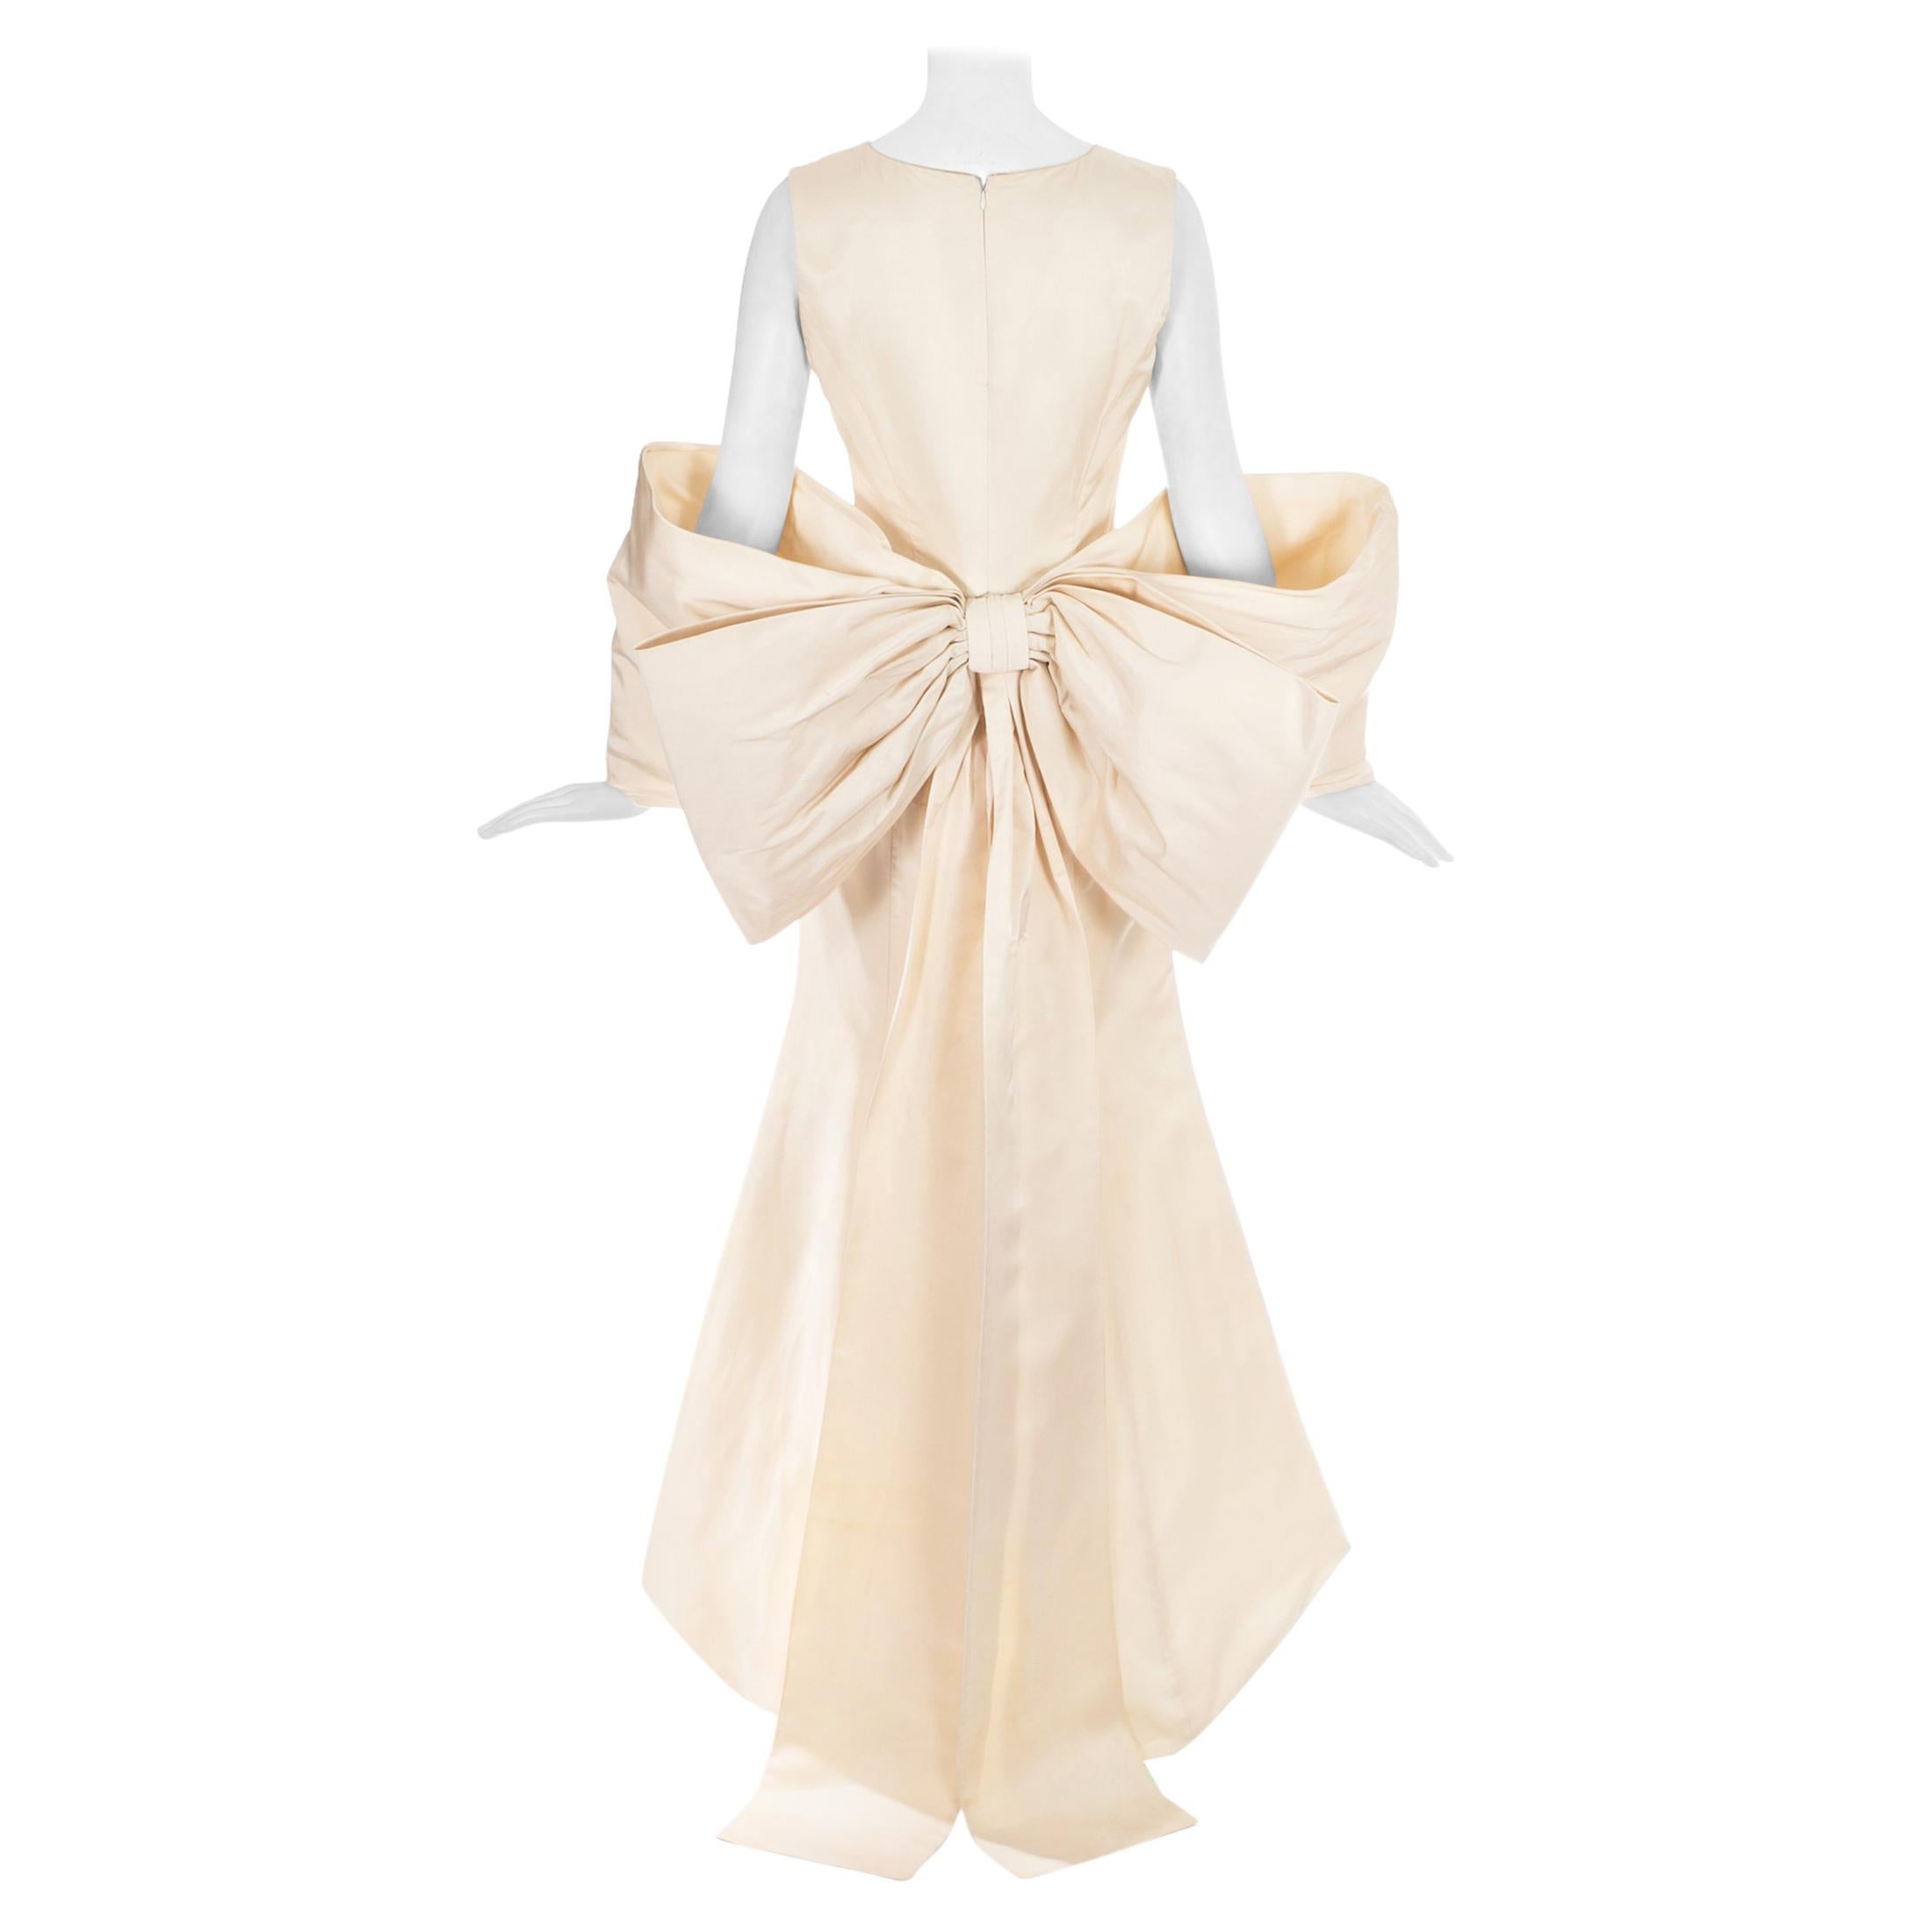 Dolce & Gabbana ivory silk fishtail wedding dress with large bow, c. 1990s For Sale